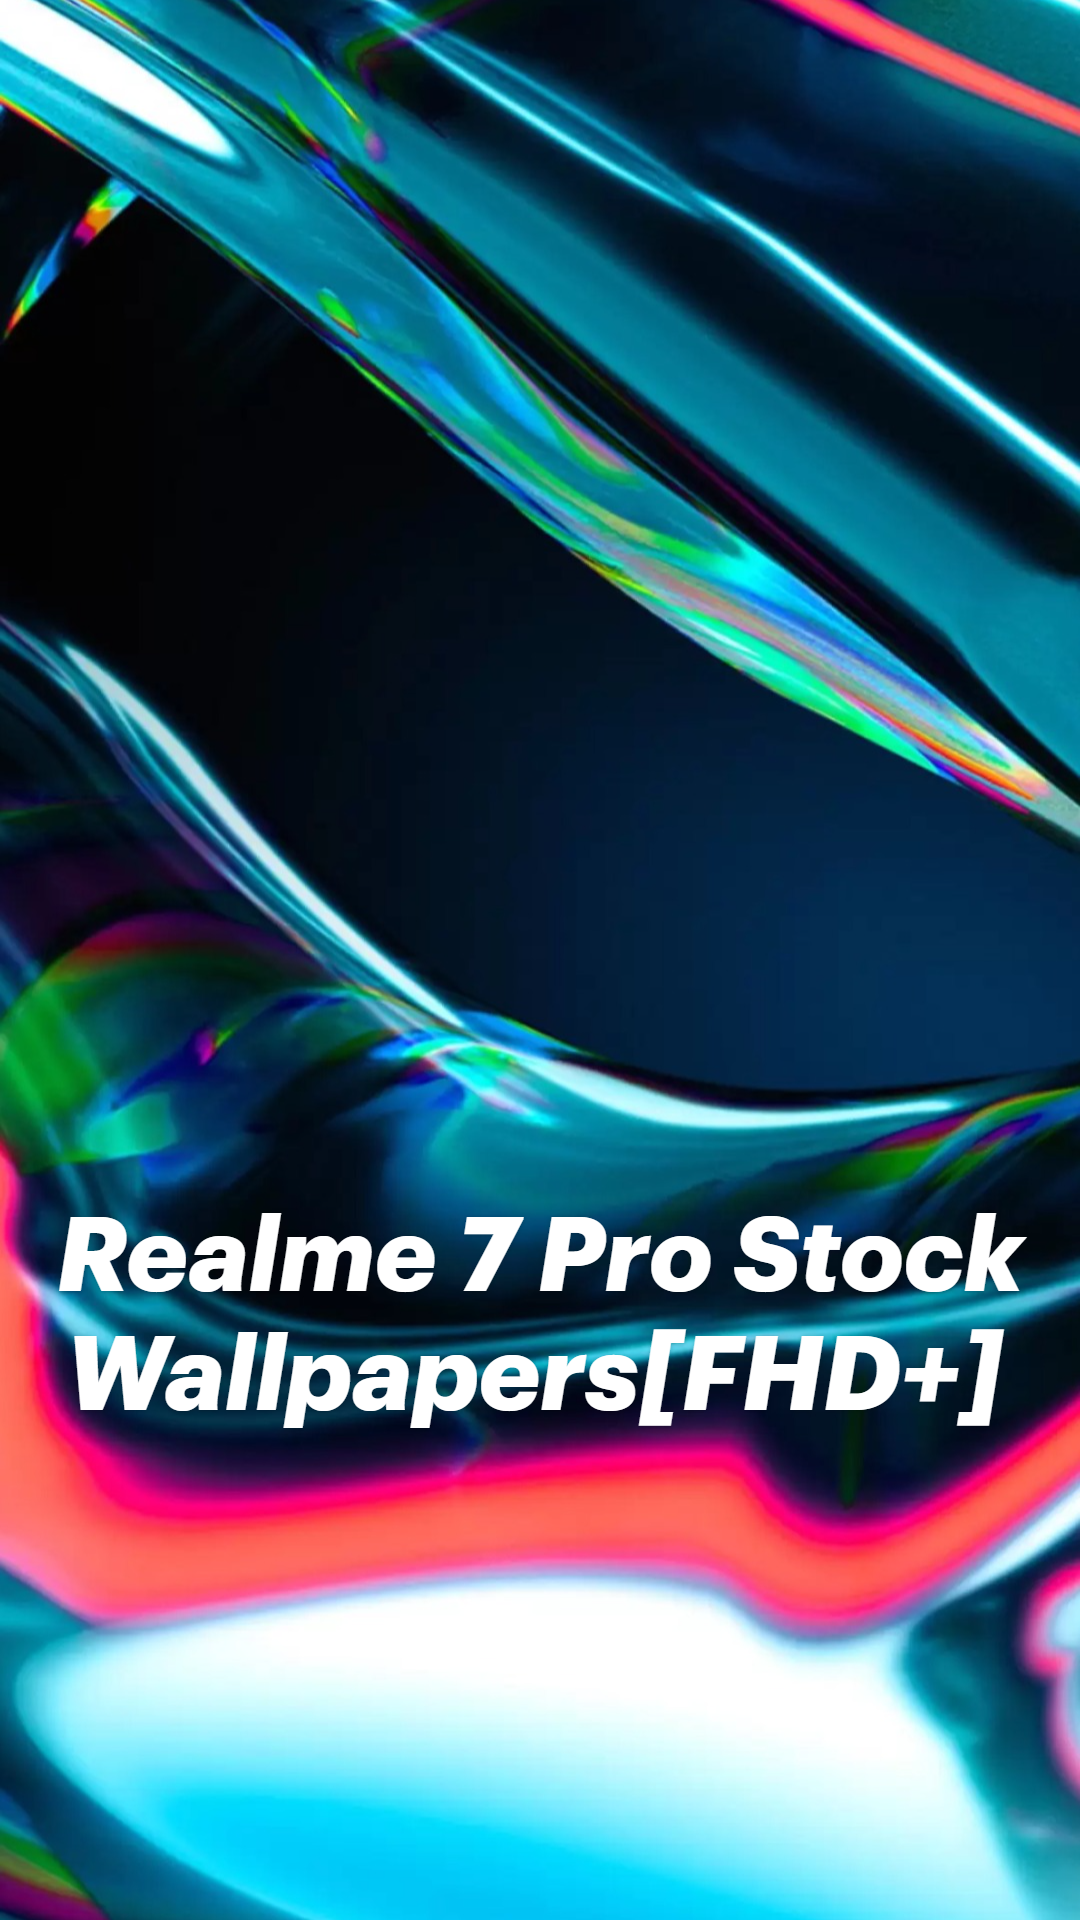 Realme 7 Pro Stock Wallpapers[FHD+]